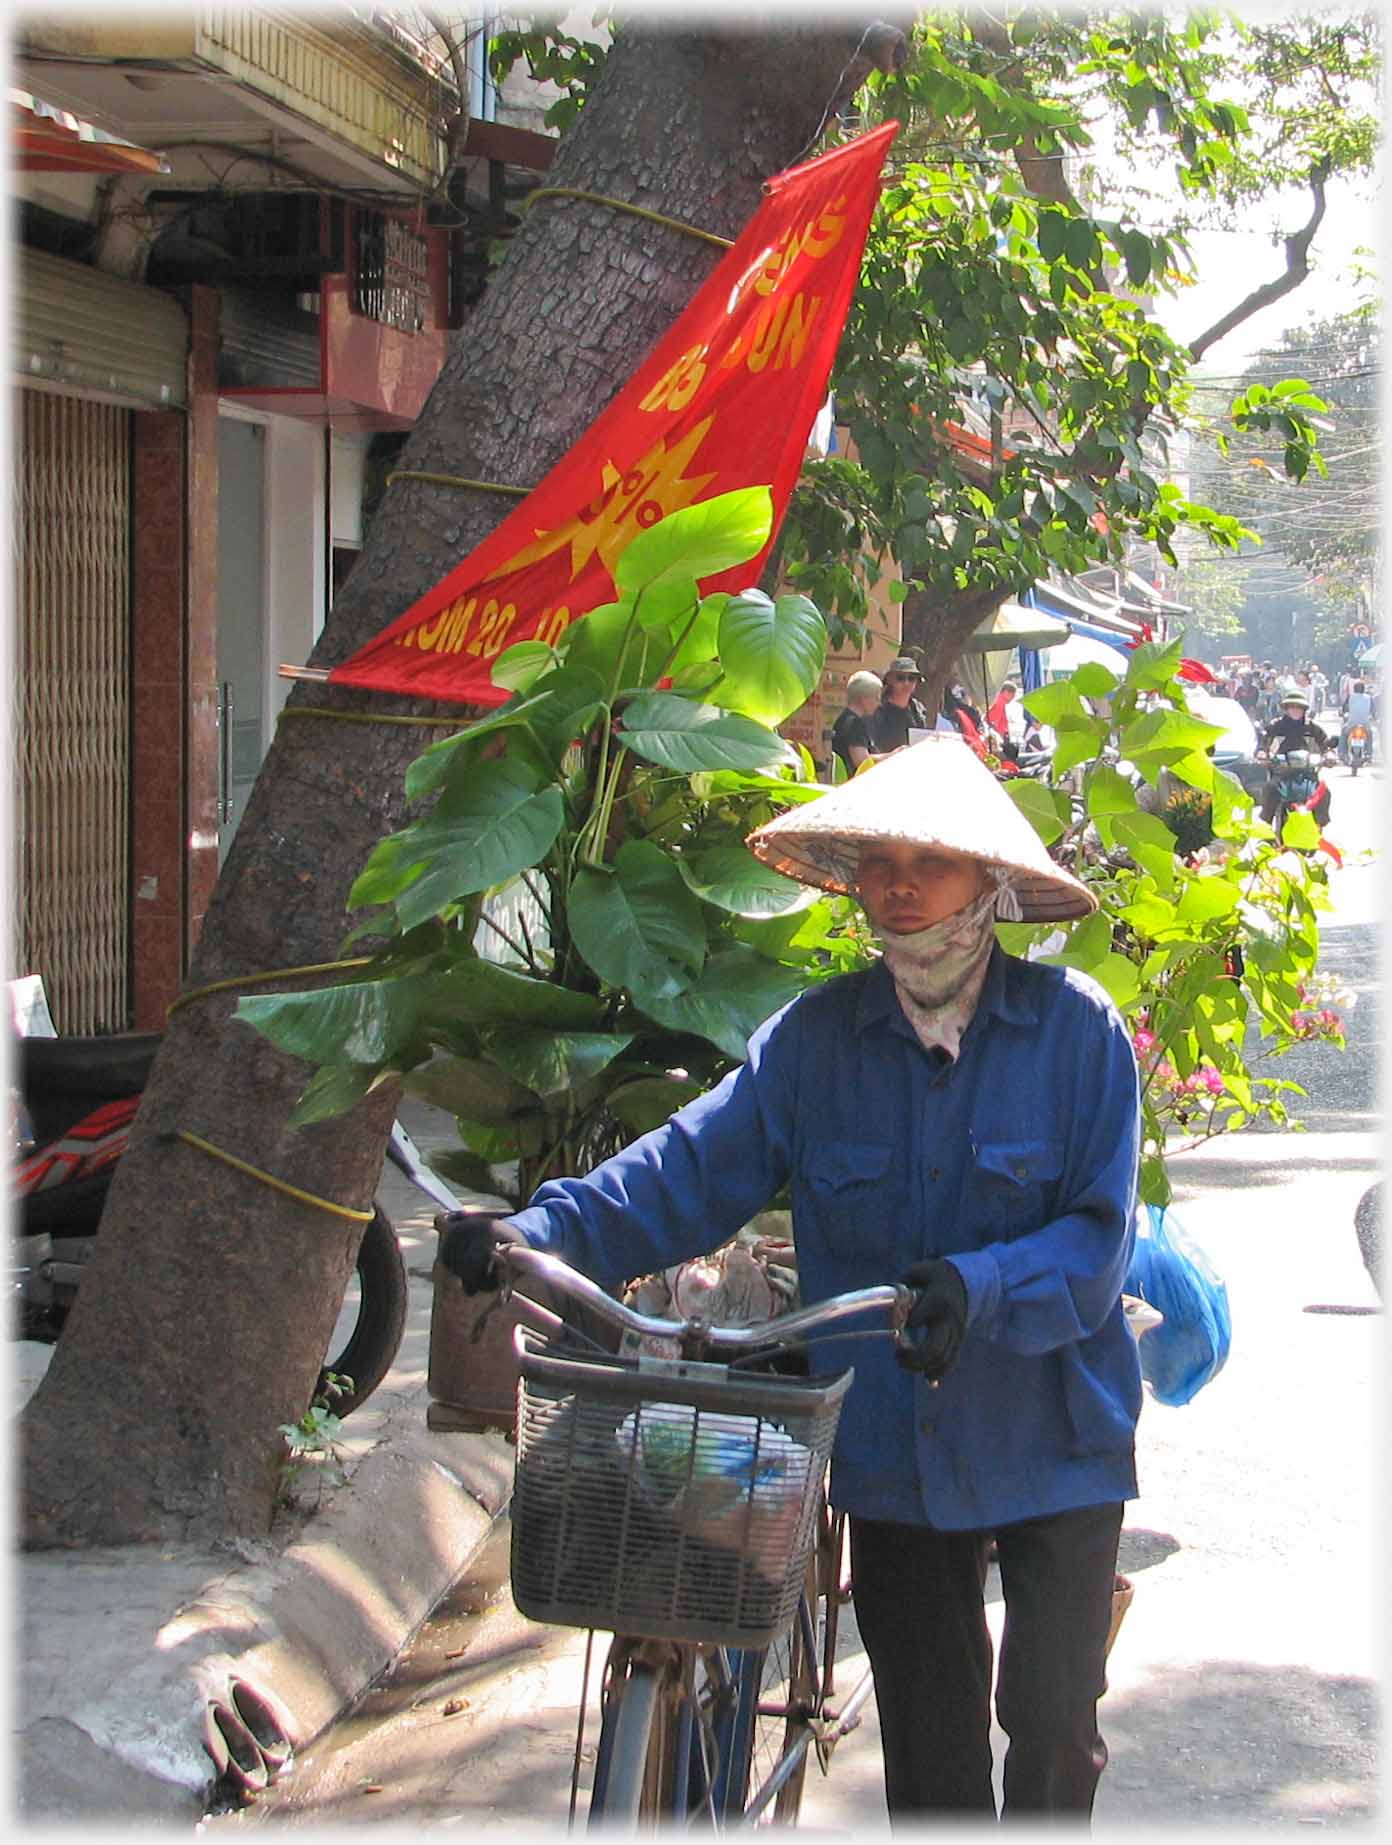 Woman with potted plants on her bicycle.